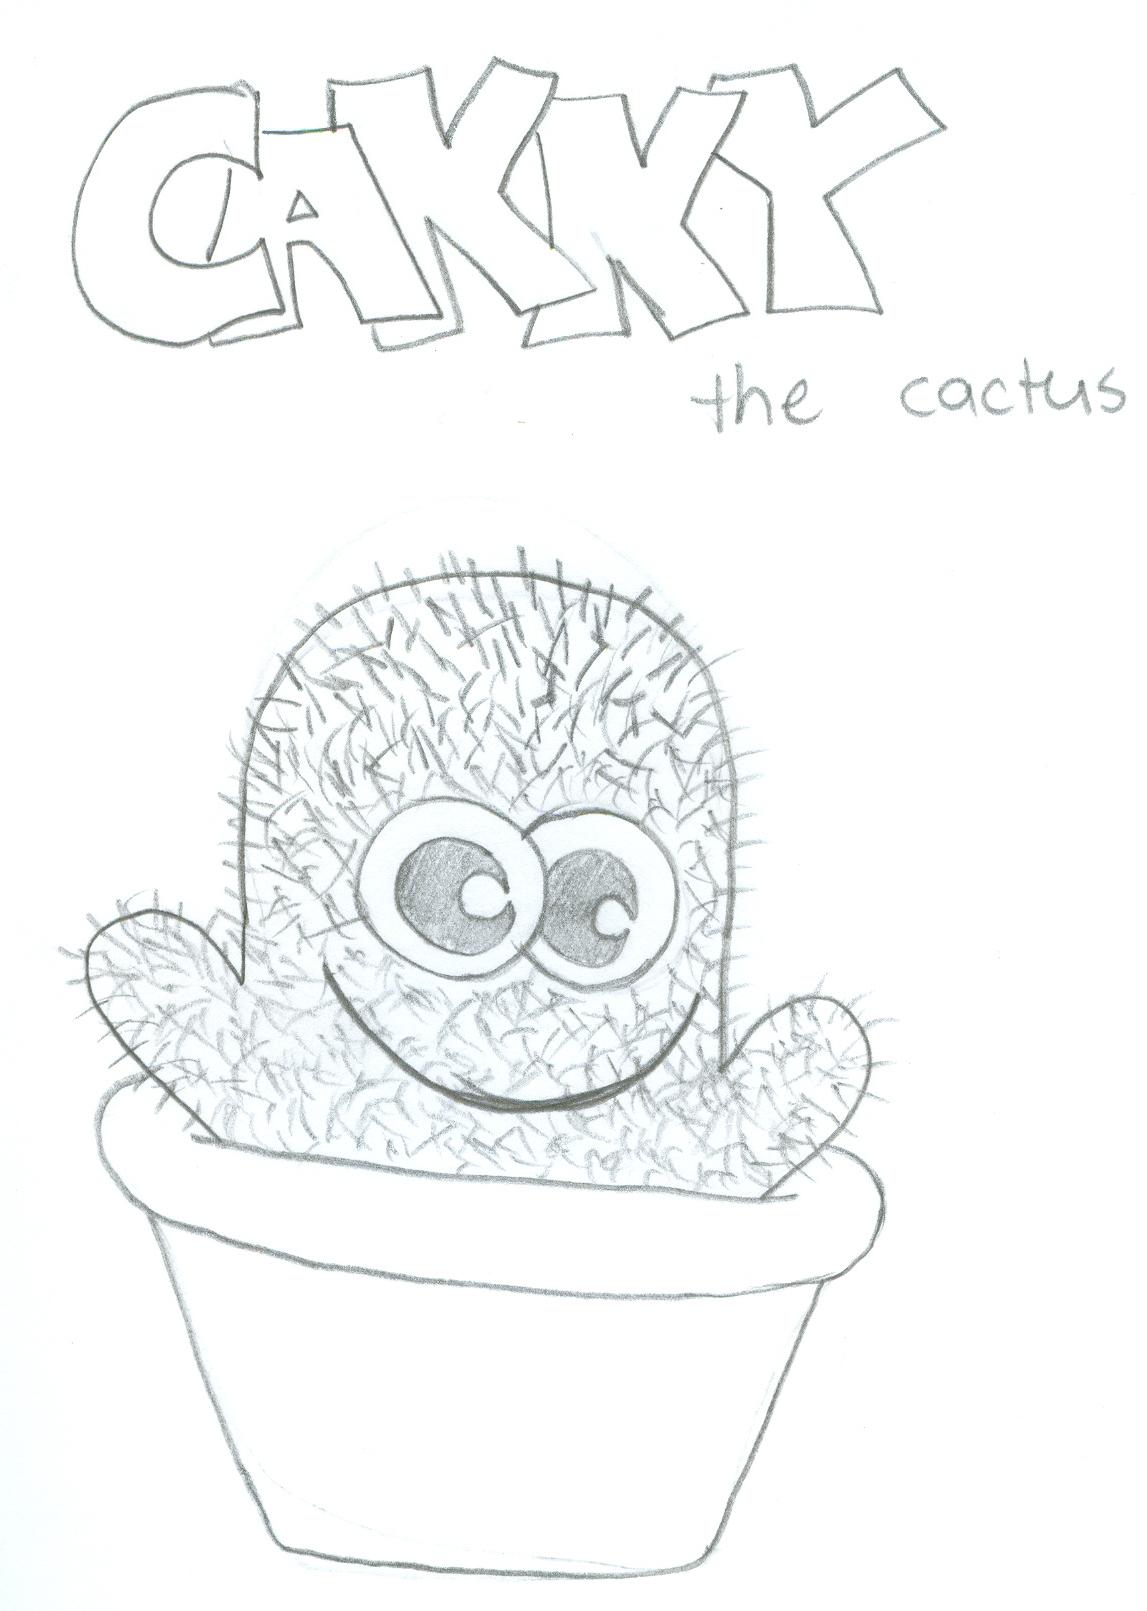 cakky the cactus by i_eat_penguins